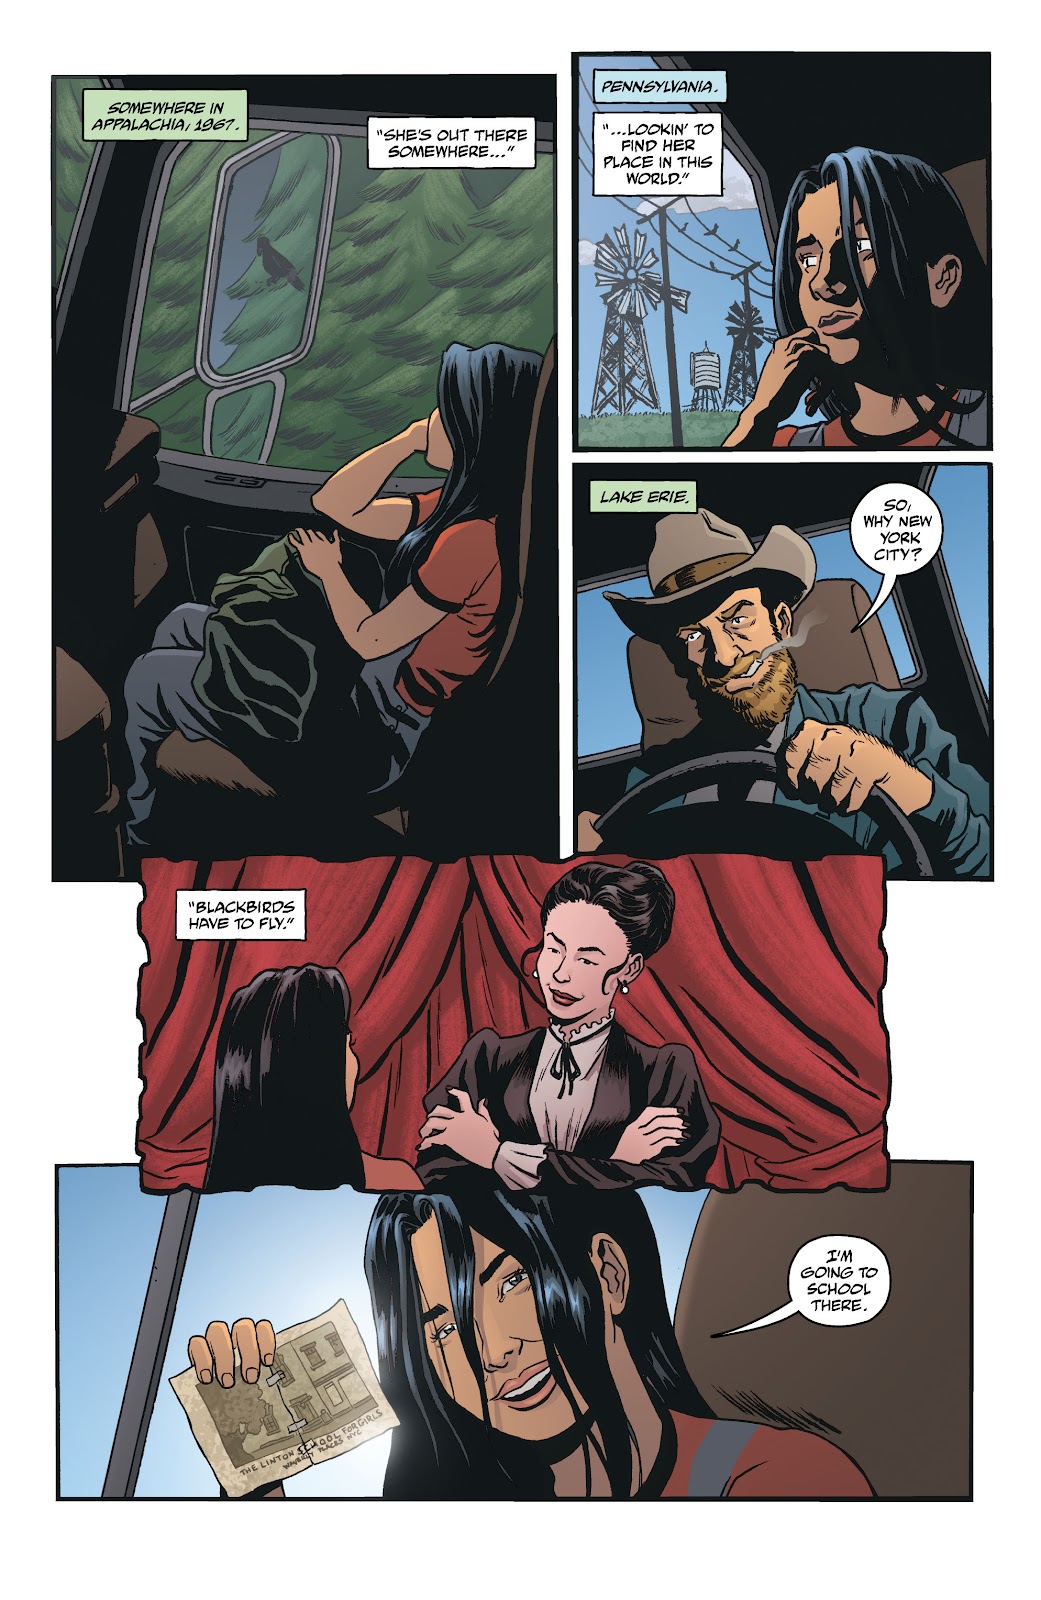 Castle Full of Blackbirds issue 1 - Page 3